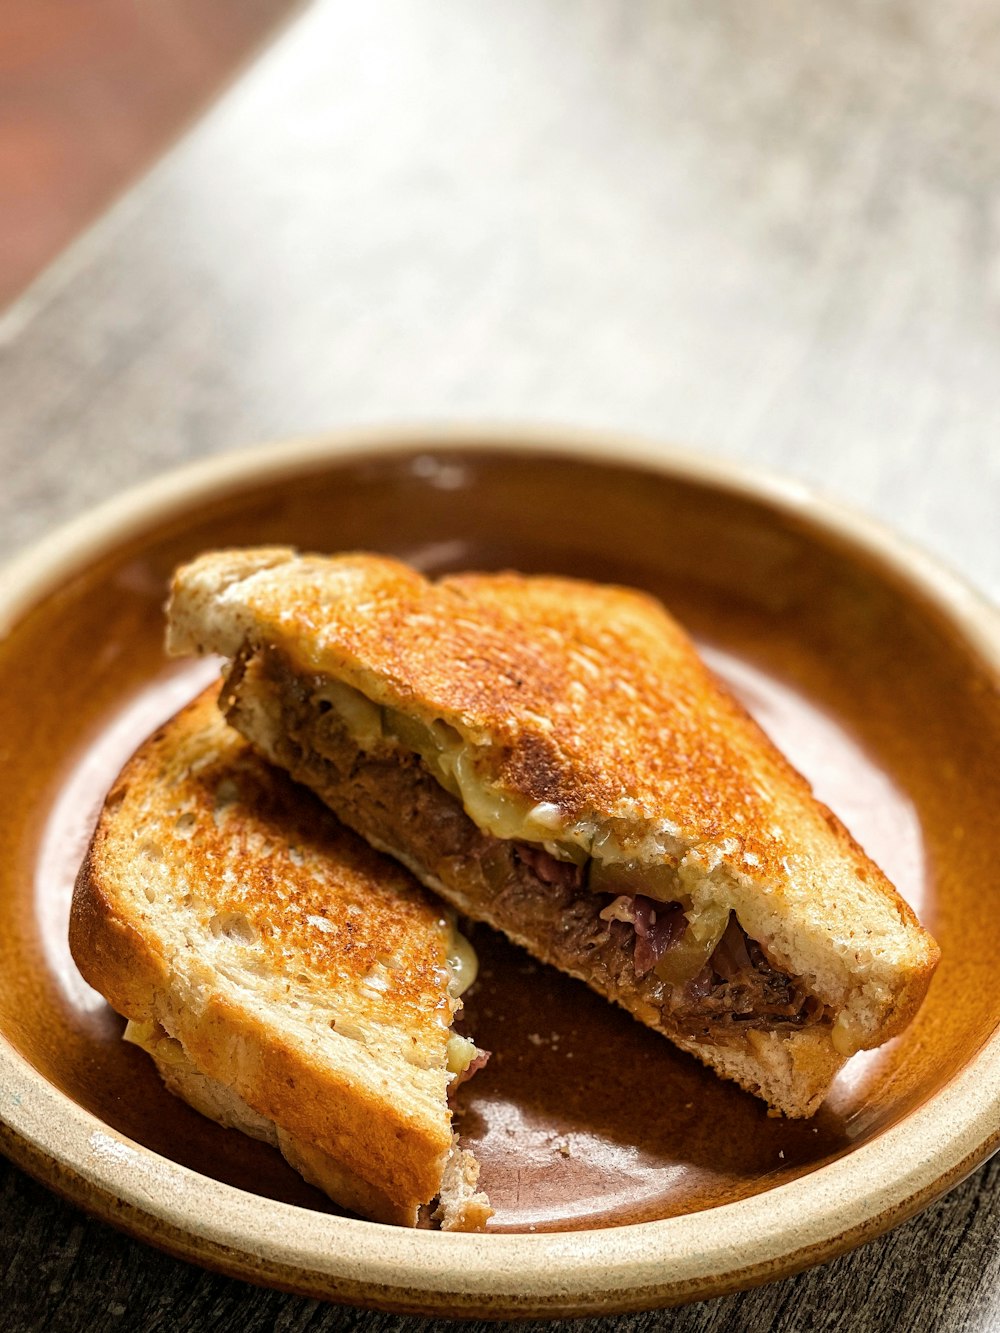 a grilled sandwich on a plate on a table